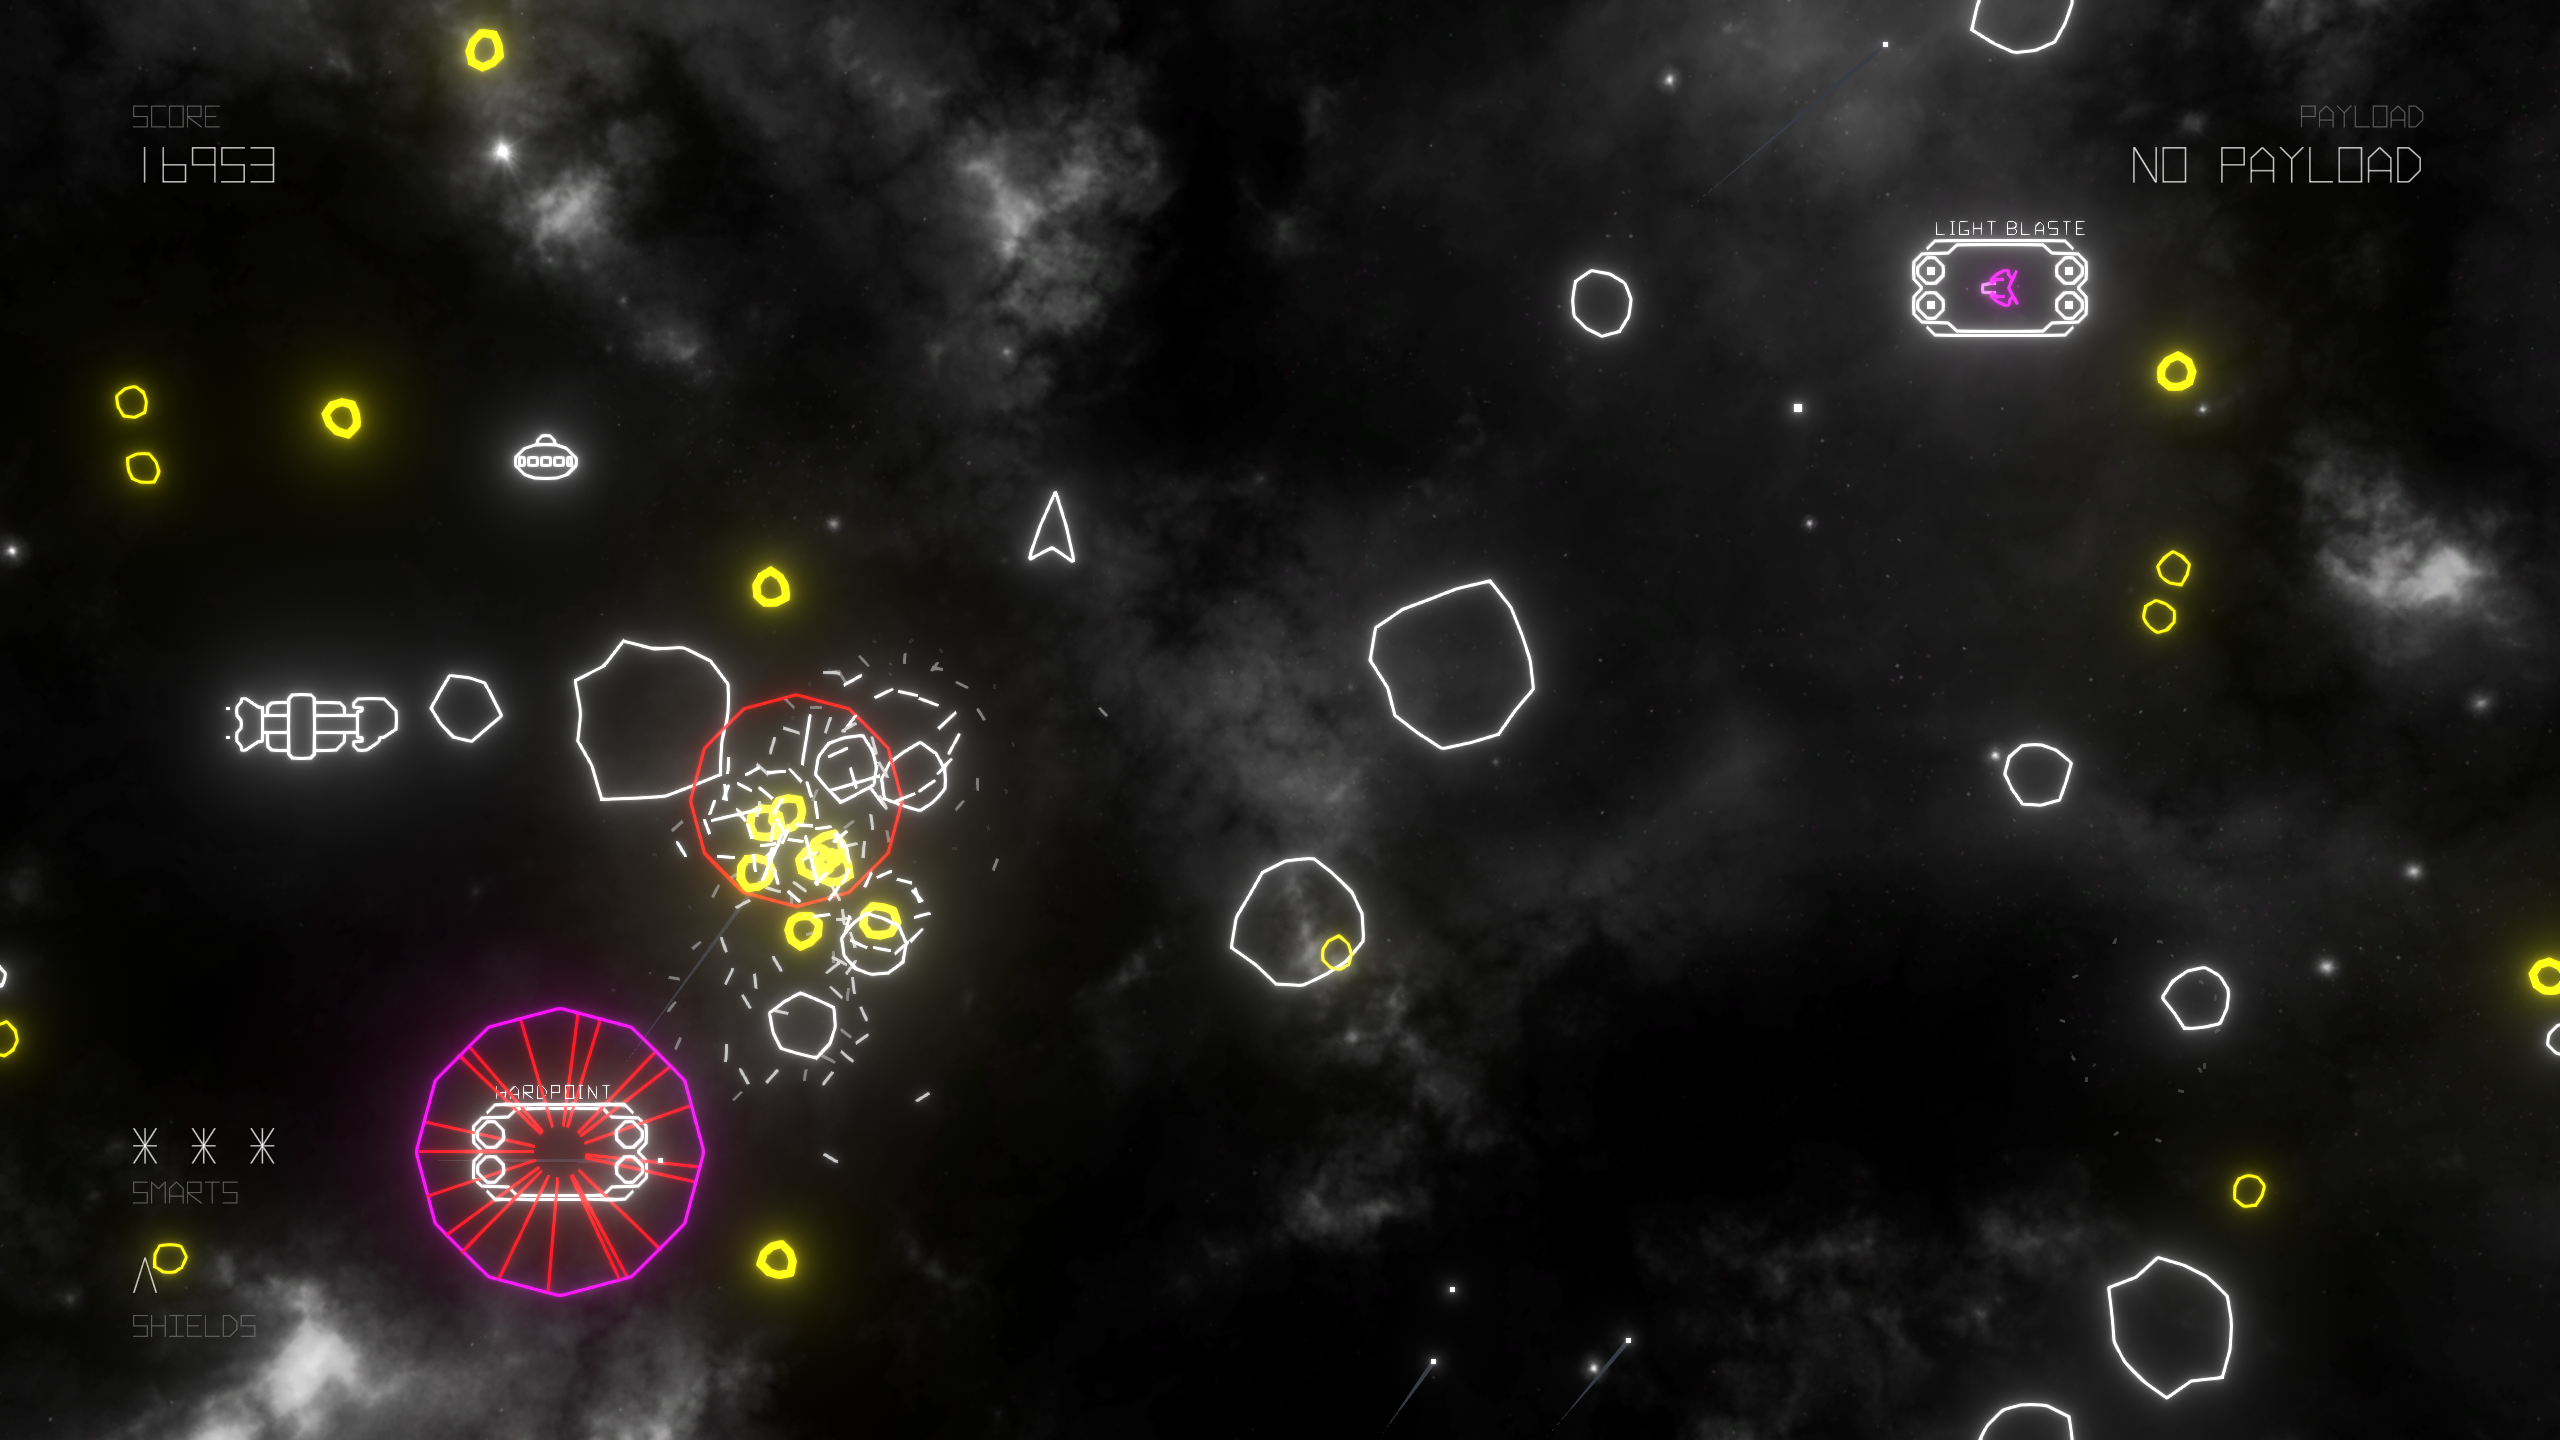 Asteroids in action.